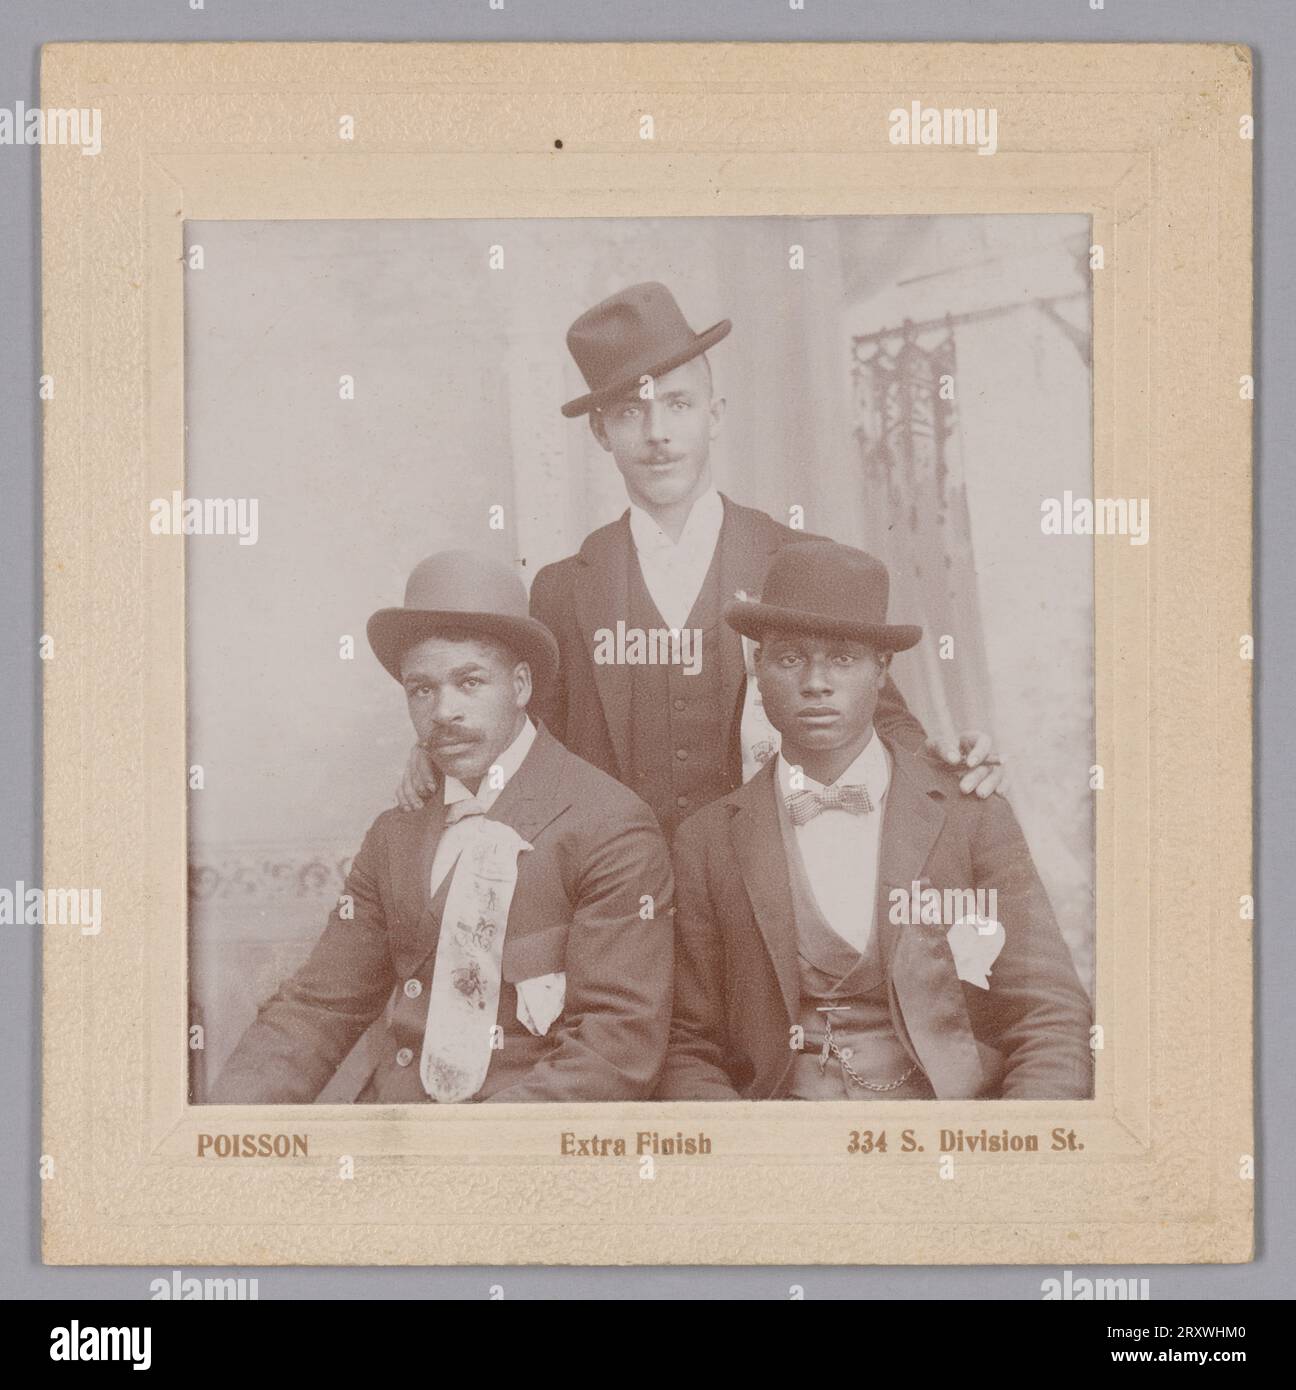 This black-and-white photograph by Joseph H. Poisson shows three (3) unidentified men who all wear dark suits, hats, and each have a wide ribbon attached to their proper left jacket lapel. Two men are seated with the third standing behind and between them, with his hands resting on their shoulders. The seated man on the left and the standing man both have light-colored ribbons with symbols printed in a darker color on them, while the man seated on the right has a plain dark-colored ribbon. The man on the right is clean-shaven, while the other two have mustaches. The photograph is mounted to a Stock Photo